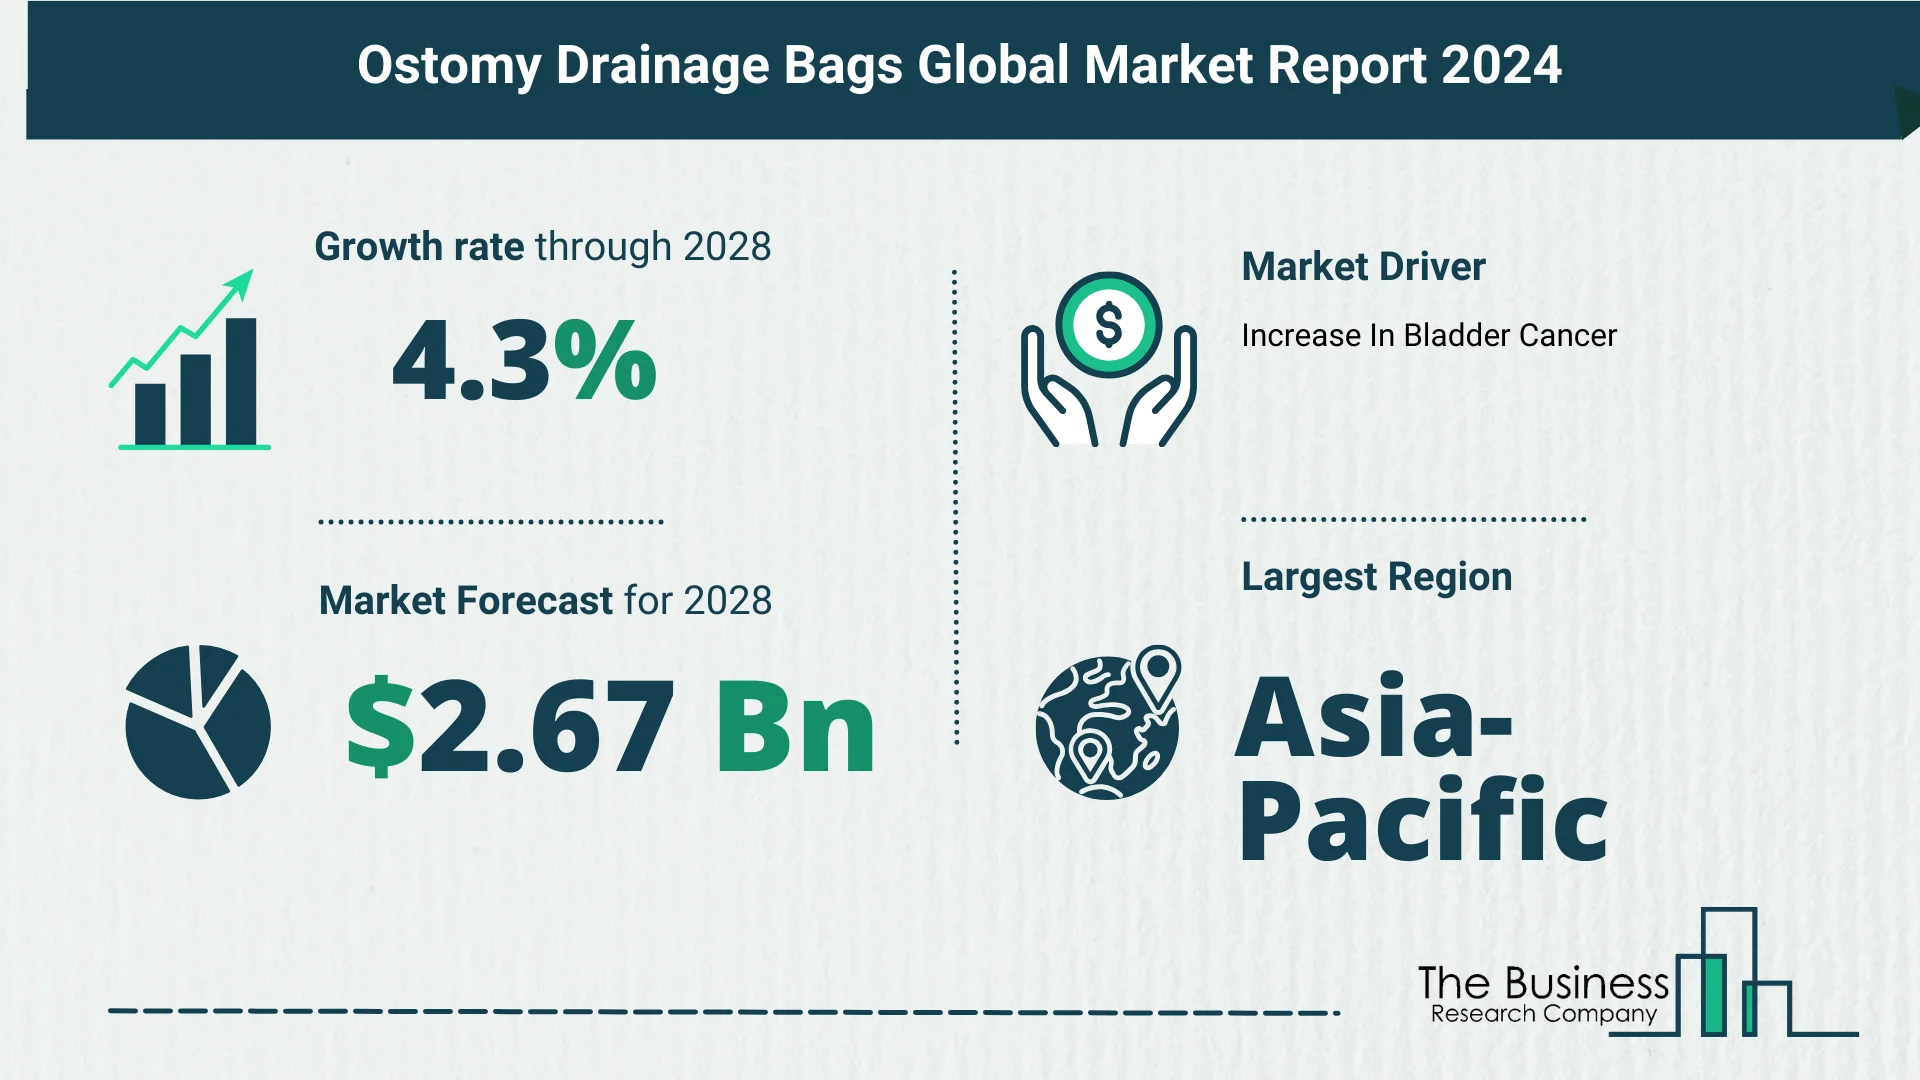 Global Ostomy Drainage Bags Market Report